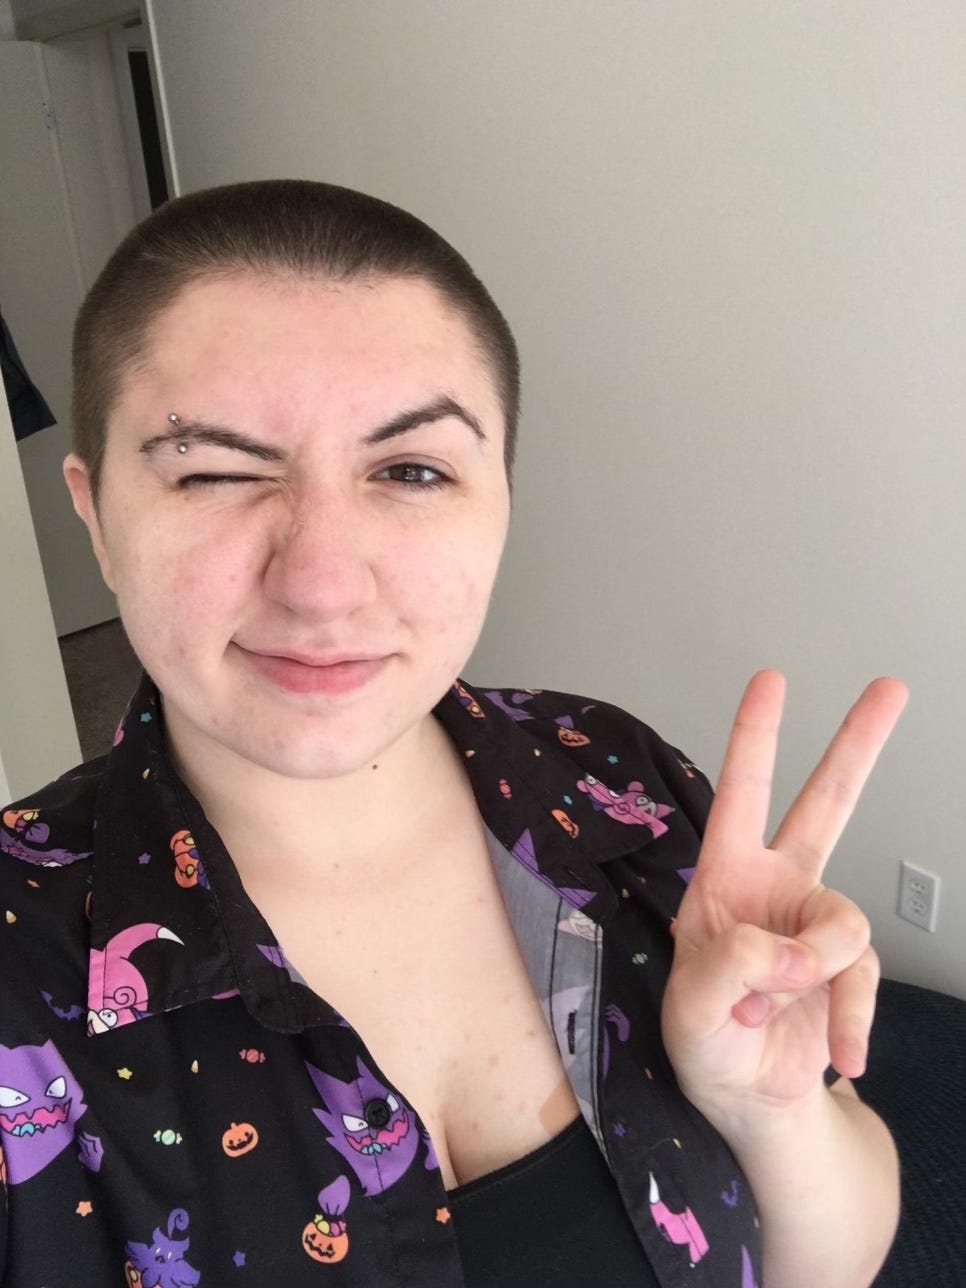 A picture of the author! She’s standing in her room, showing a peace sign to the camera. She winking at the camera and looking forward, smirking. She has an eyebrow piercing over her right eyebrow. She’s wearing a black button up with a pokemon pattern, over a black camisole. Her hair is brown and buzzed short.